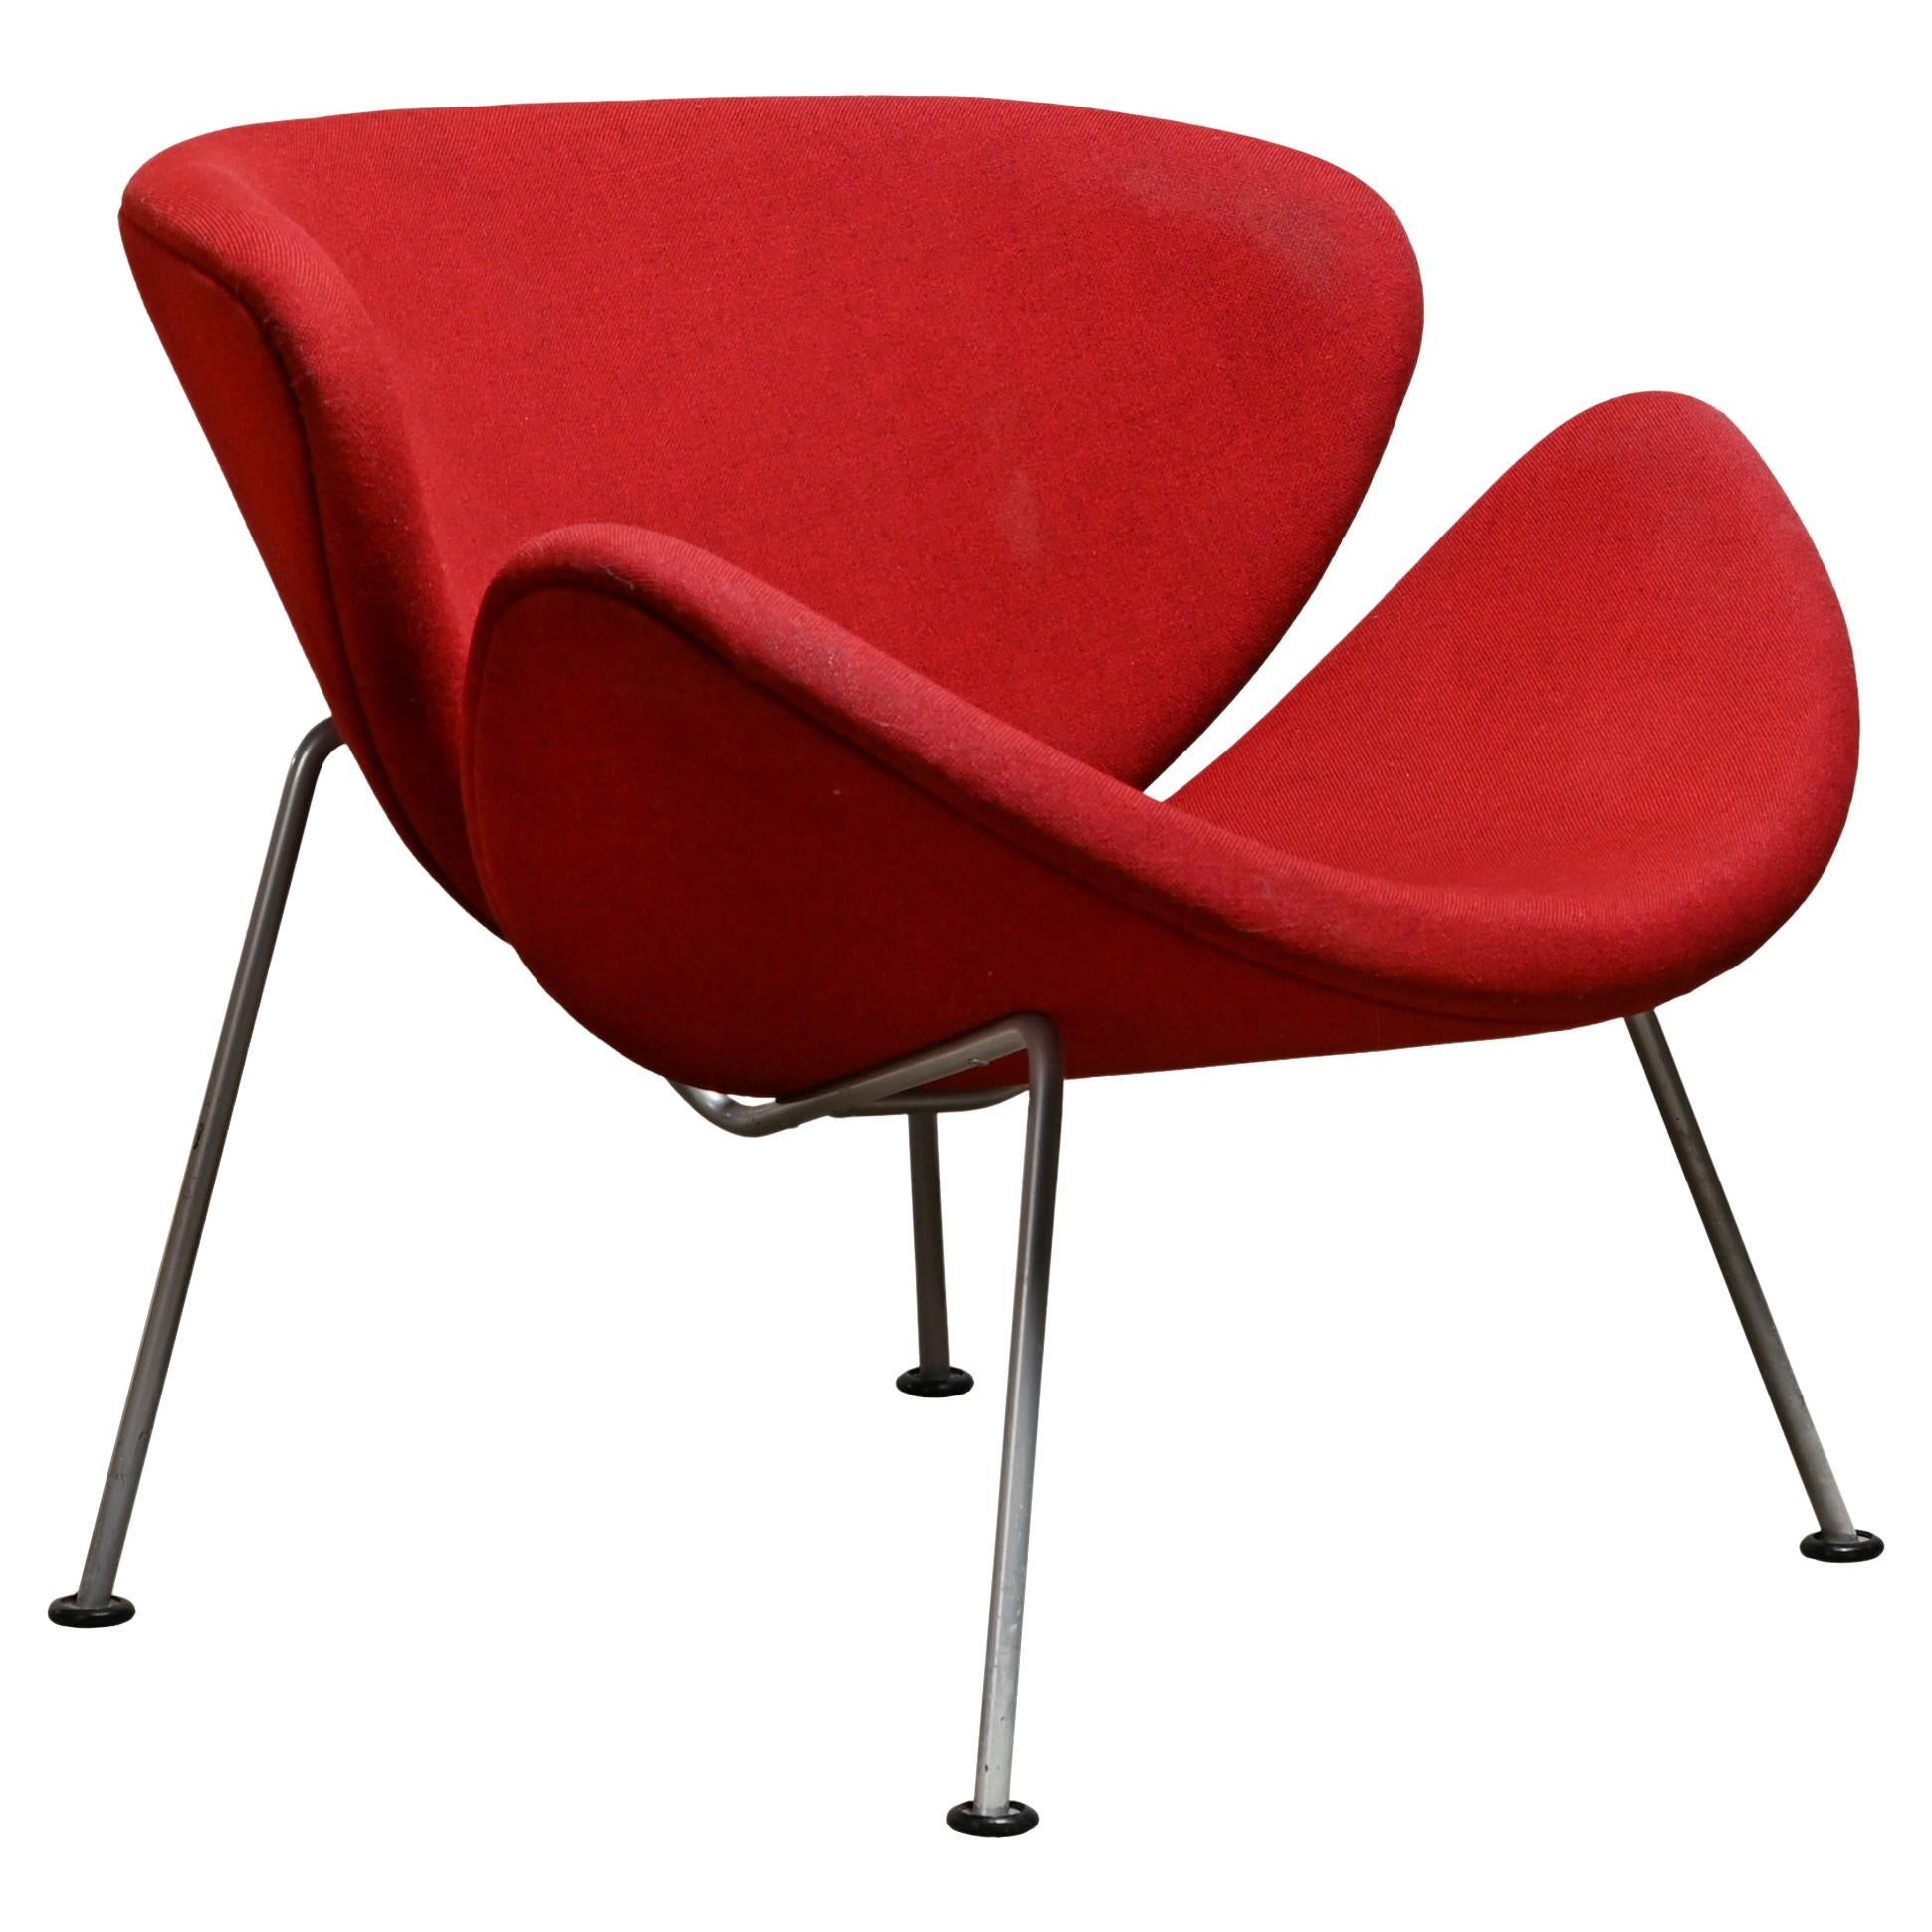 Early Pierre Paulin 'Orange Slice' Chair in Red Fabric by Artifort, Netherlands For Sale